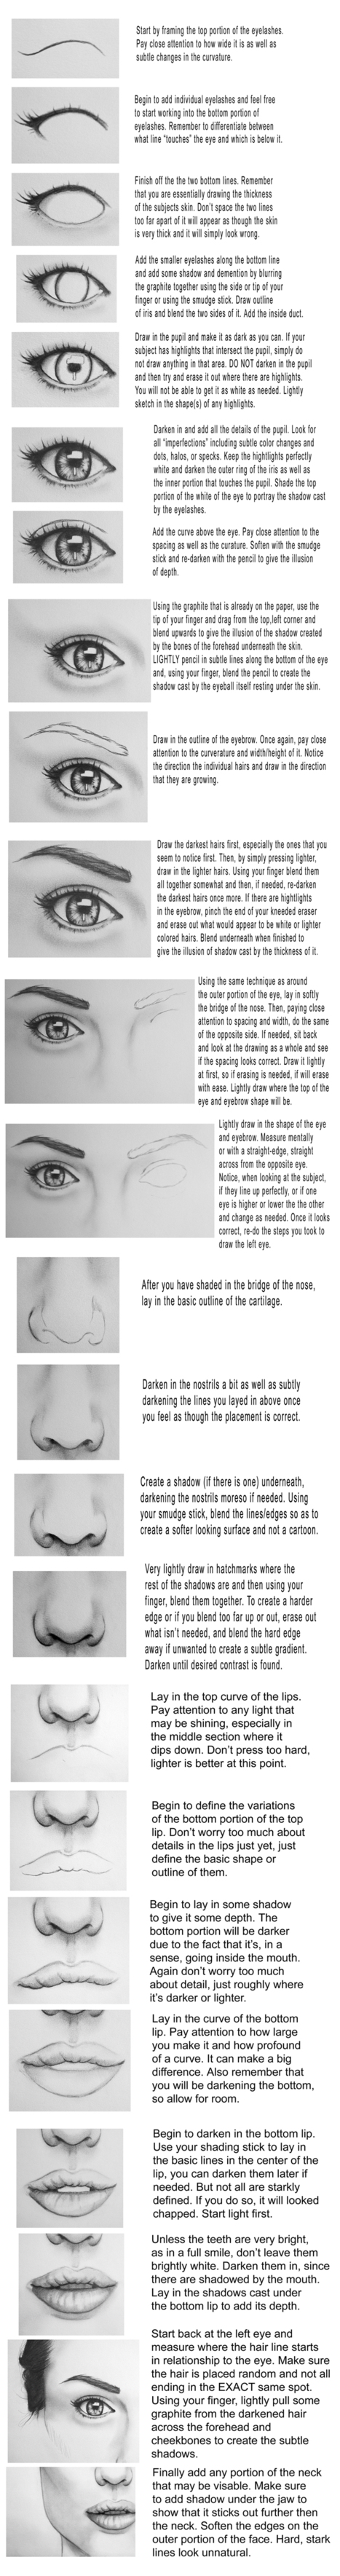 Portrait Drawing Tutorial | Drawing and Painting Tutorials | Scoop.it